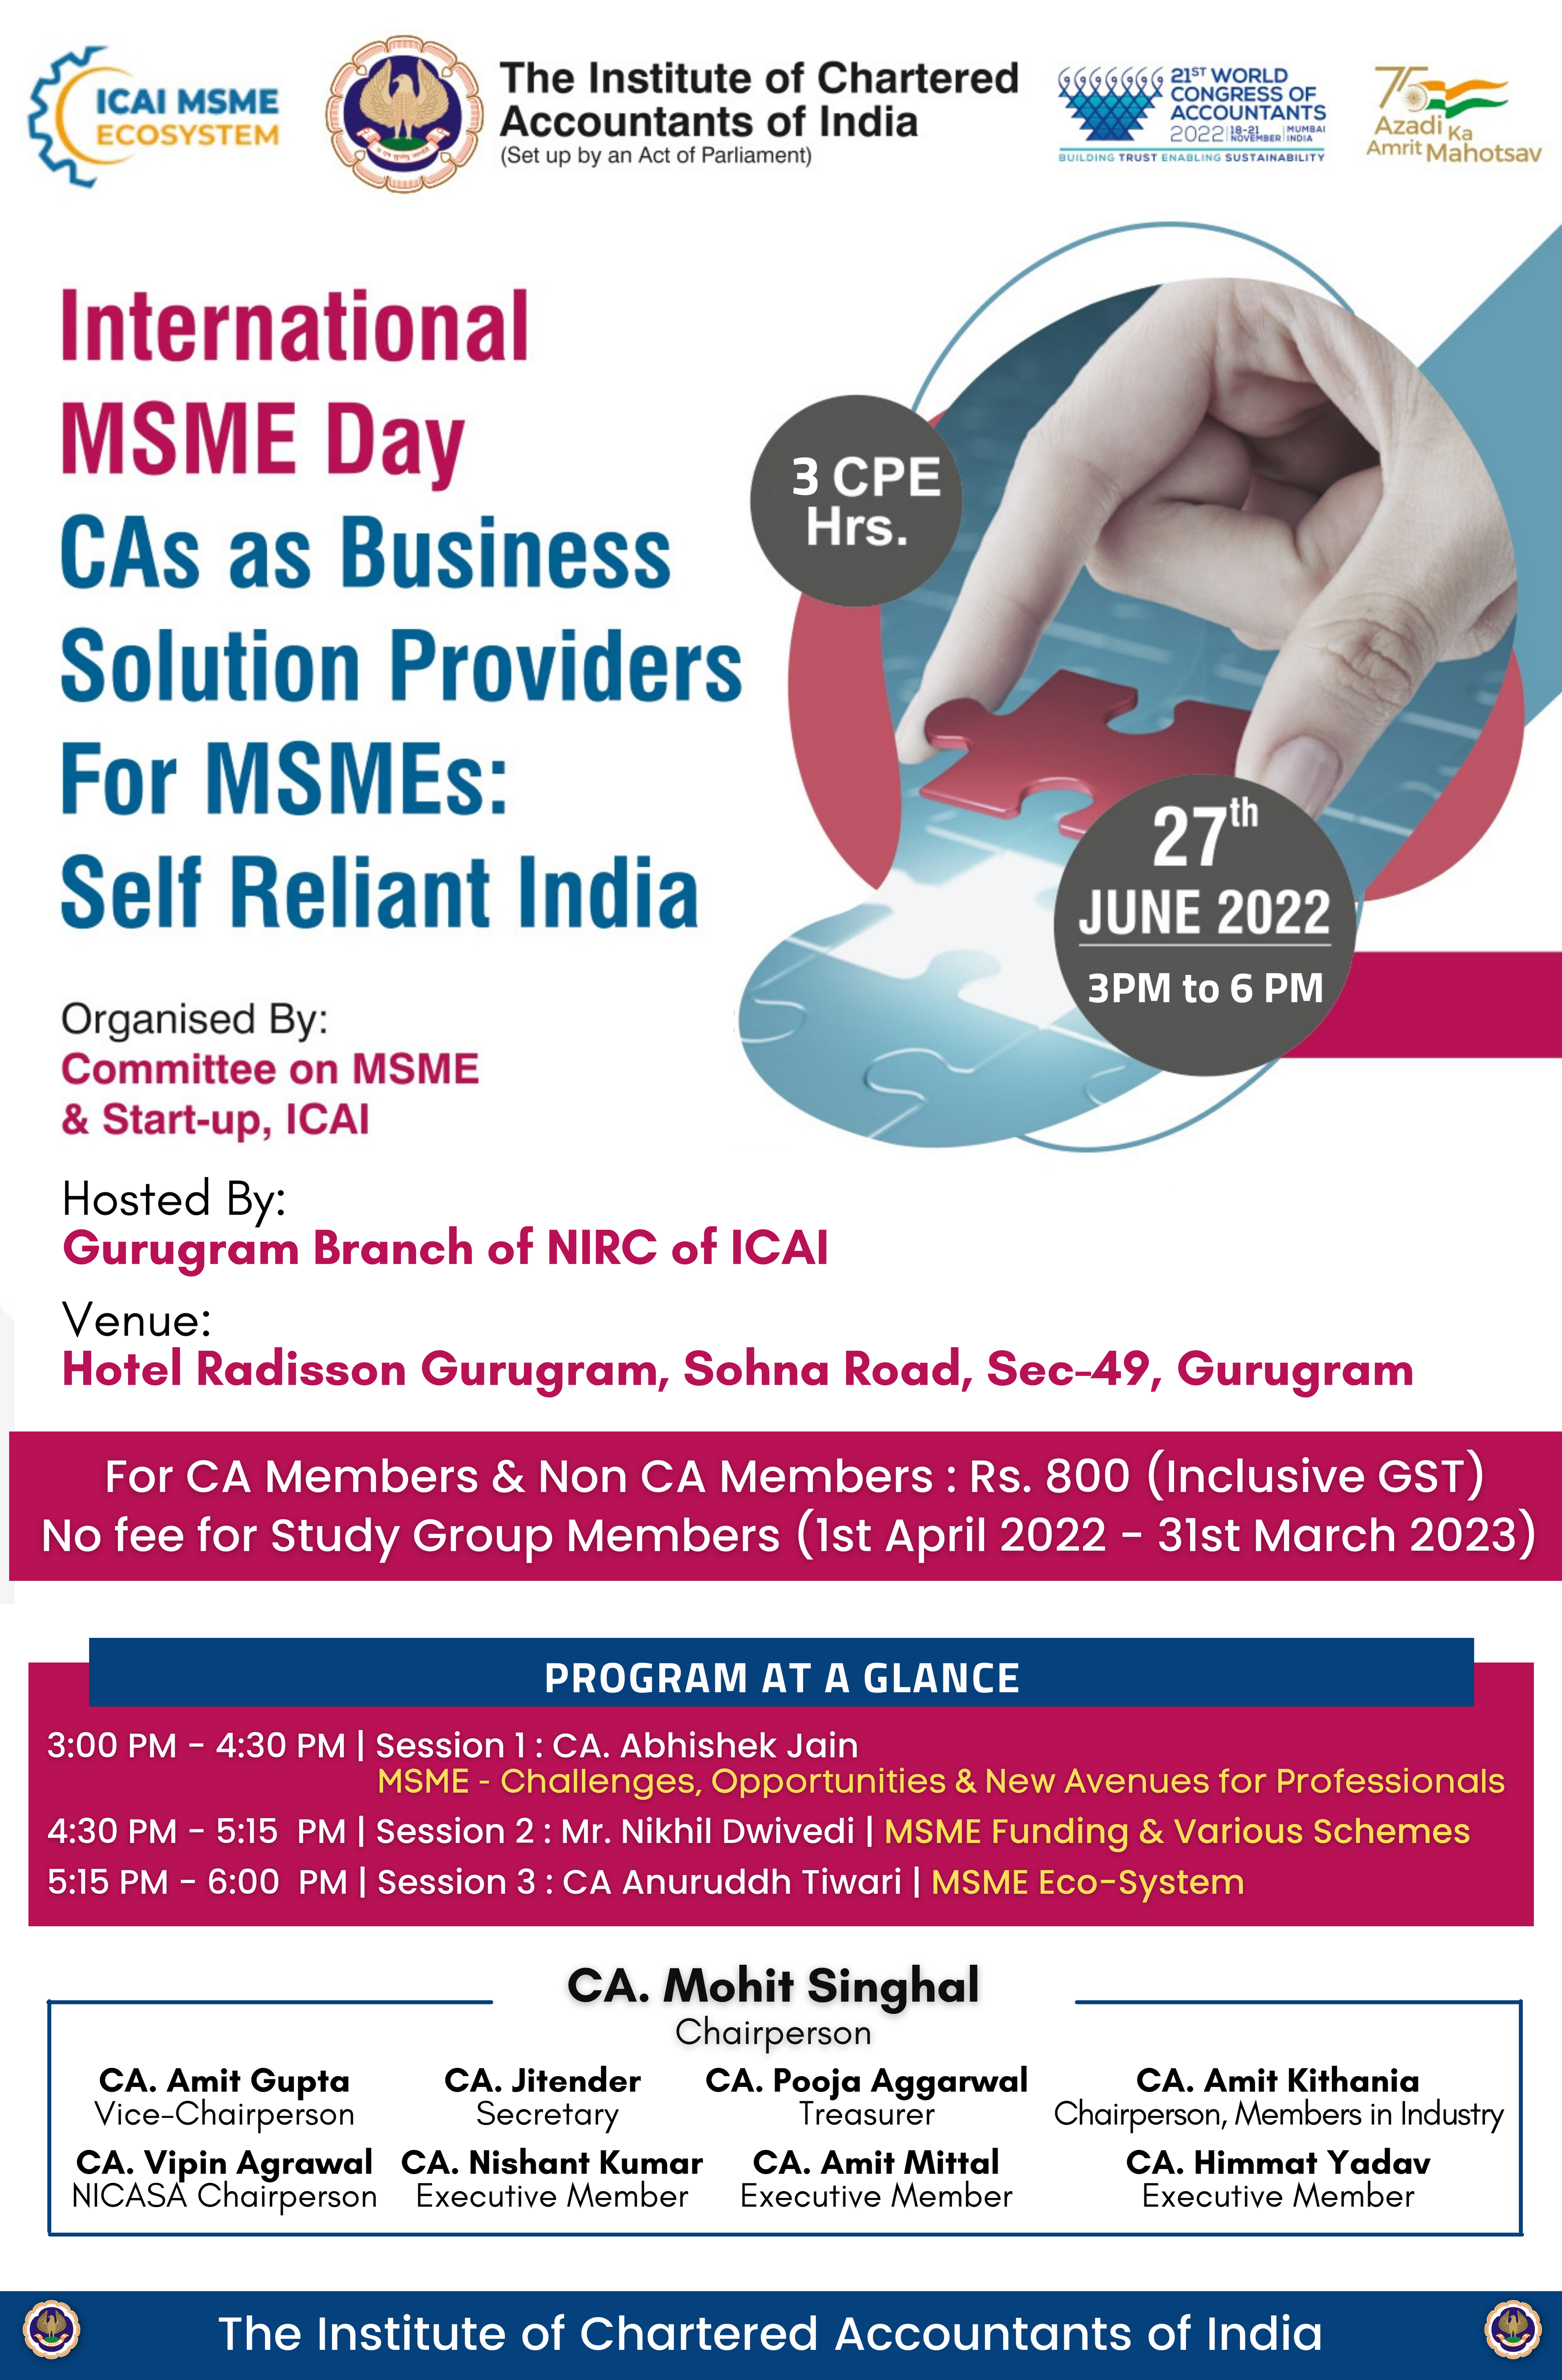 Physical Seminar on CAs as Business Solution Providers for MSMEs: Self Reliant India